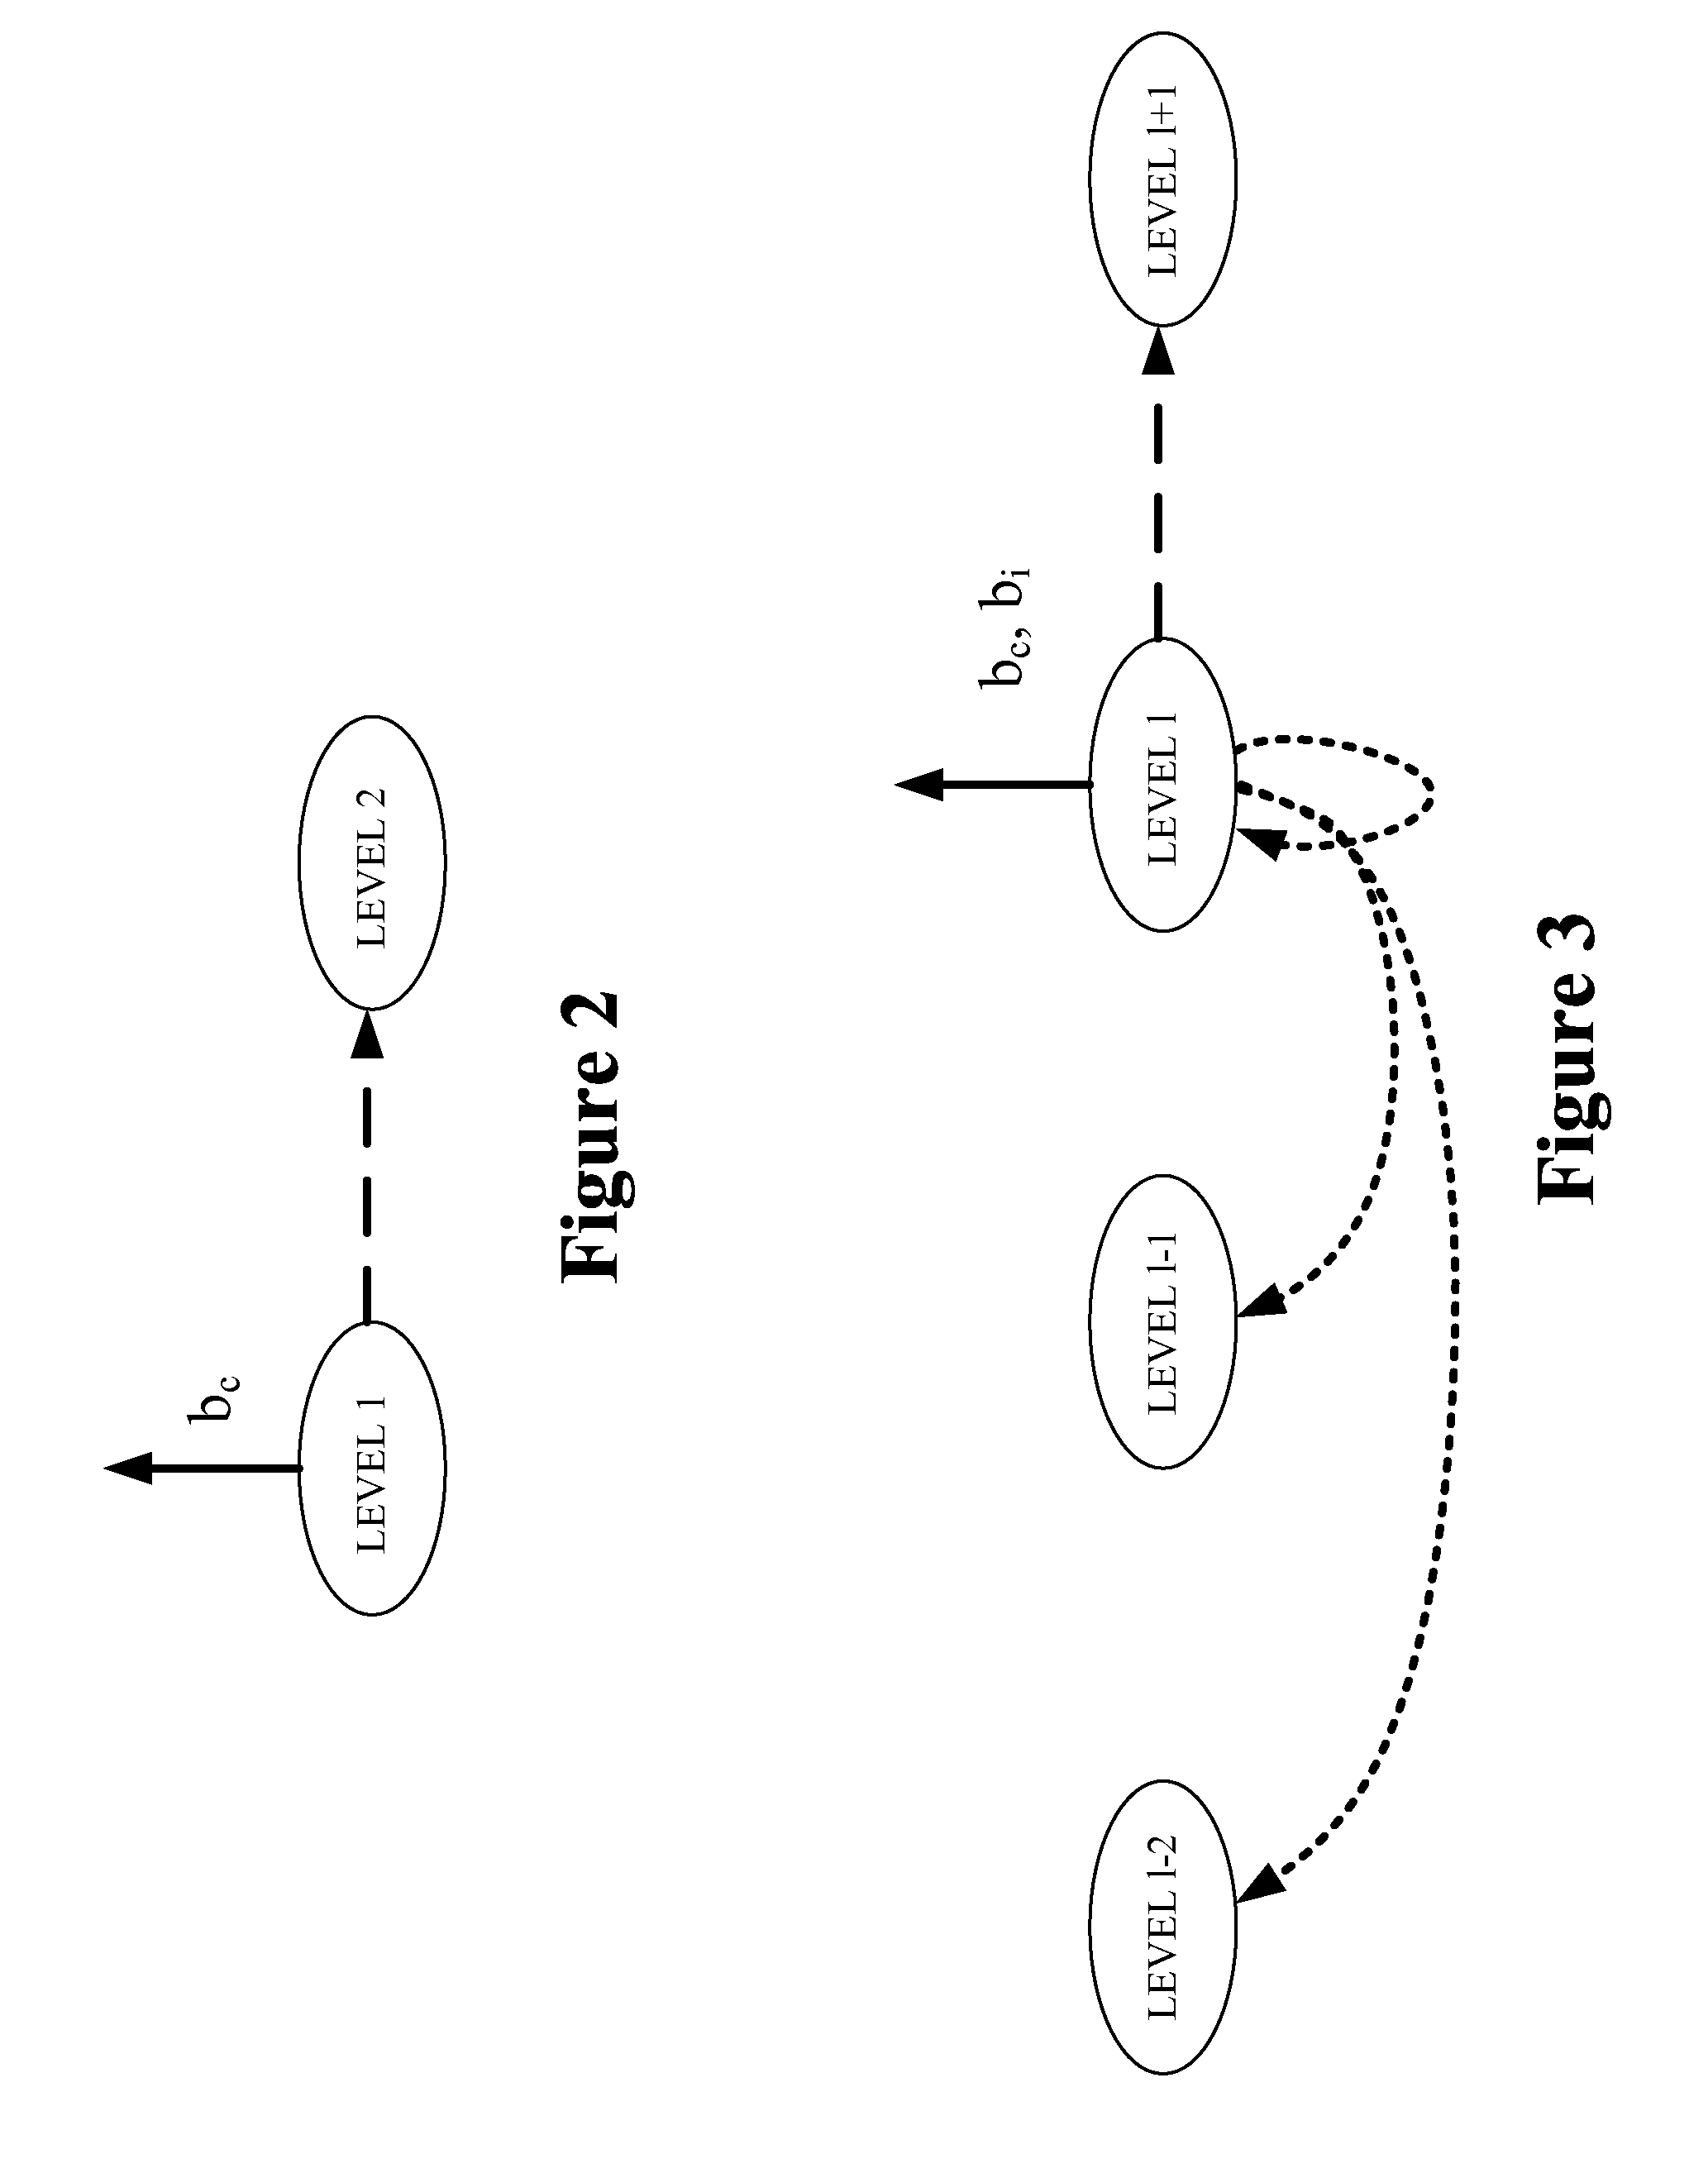 Closed-loop multiple-input-multiple-output scheme for wireless communication based on hierarchical feedback